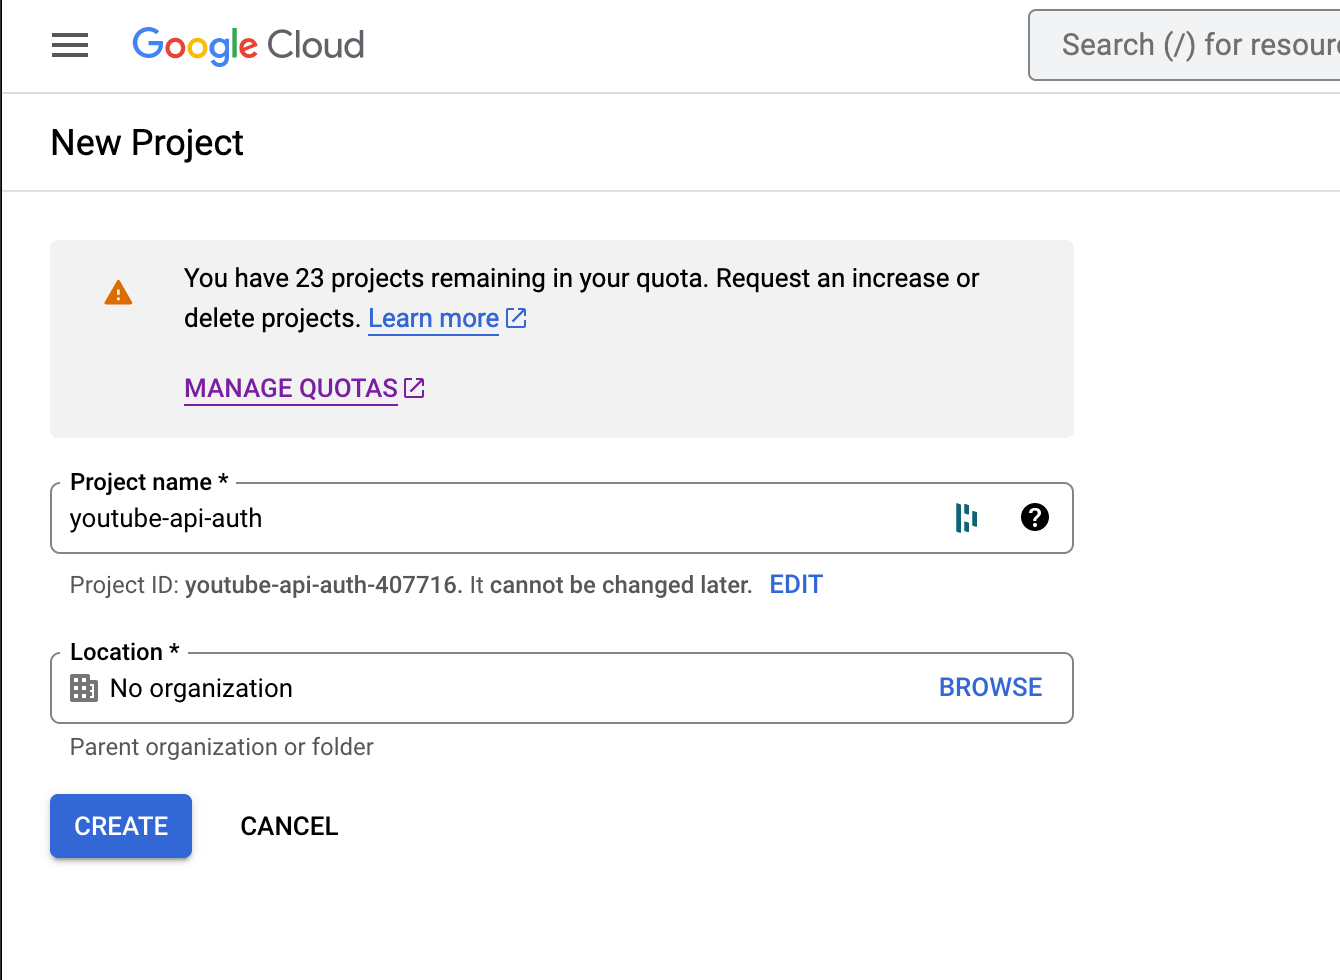 Create a new project in the Google Cloud Console.